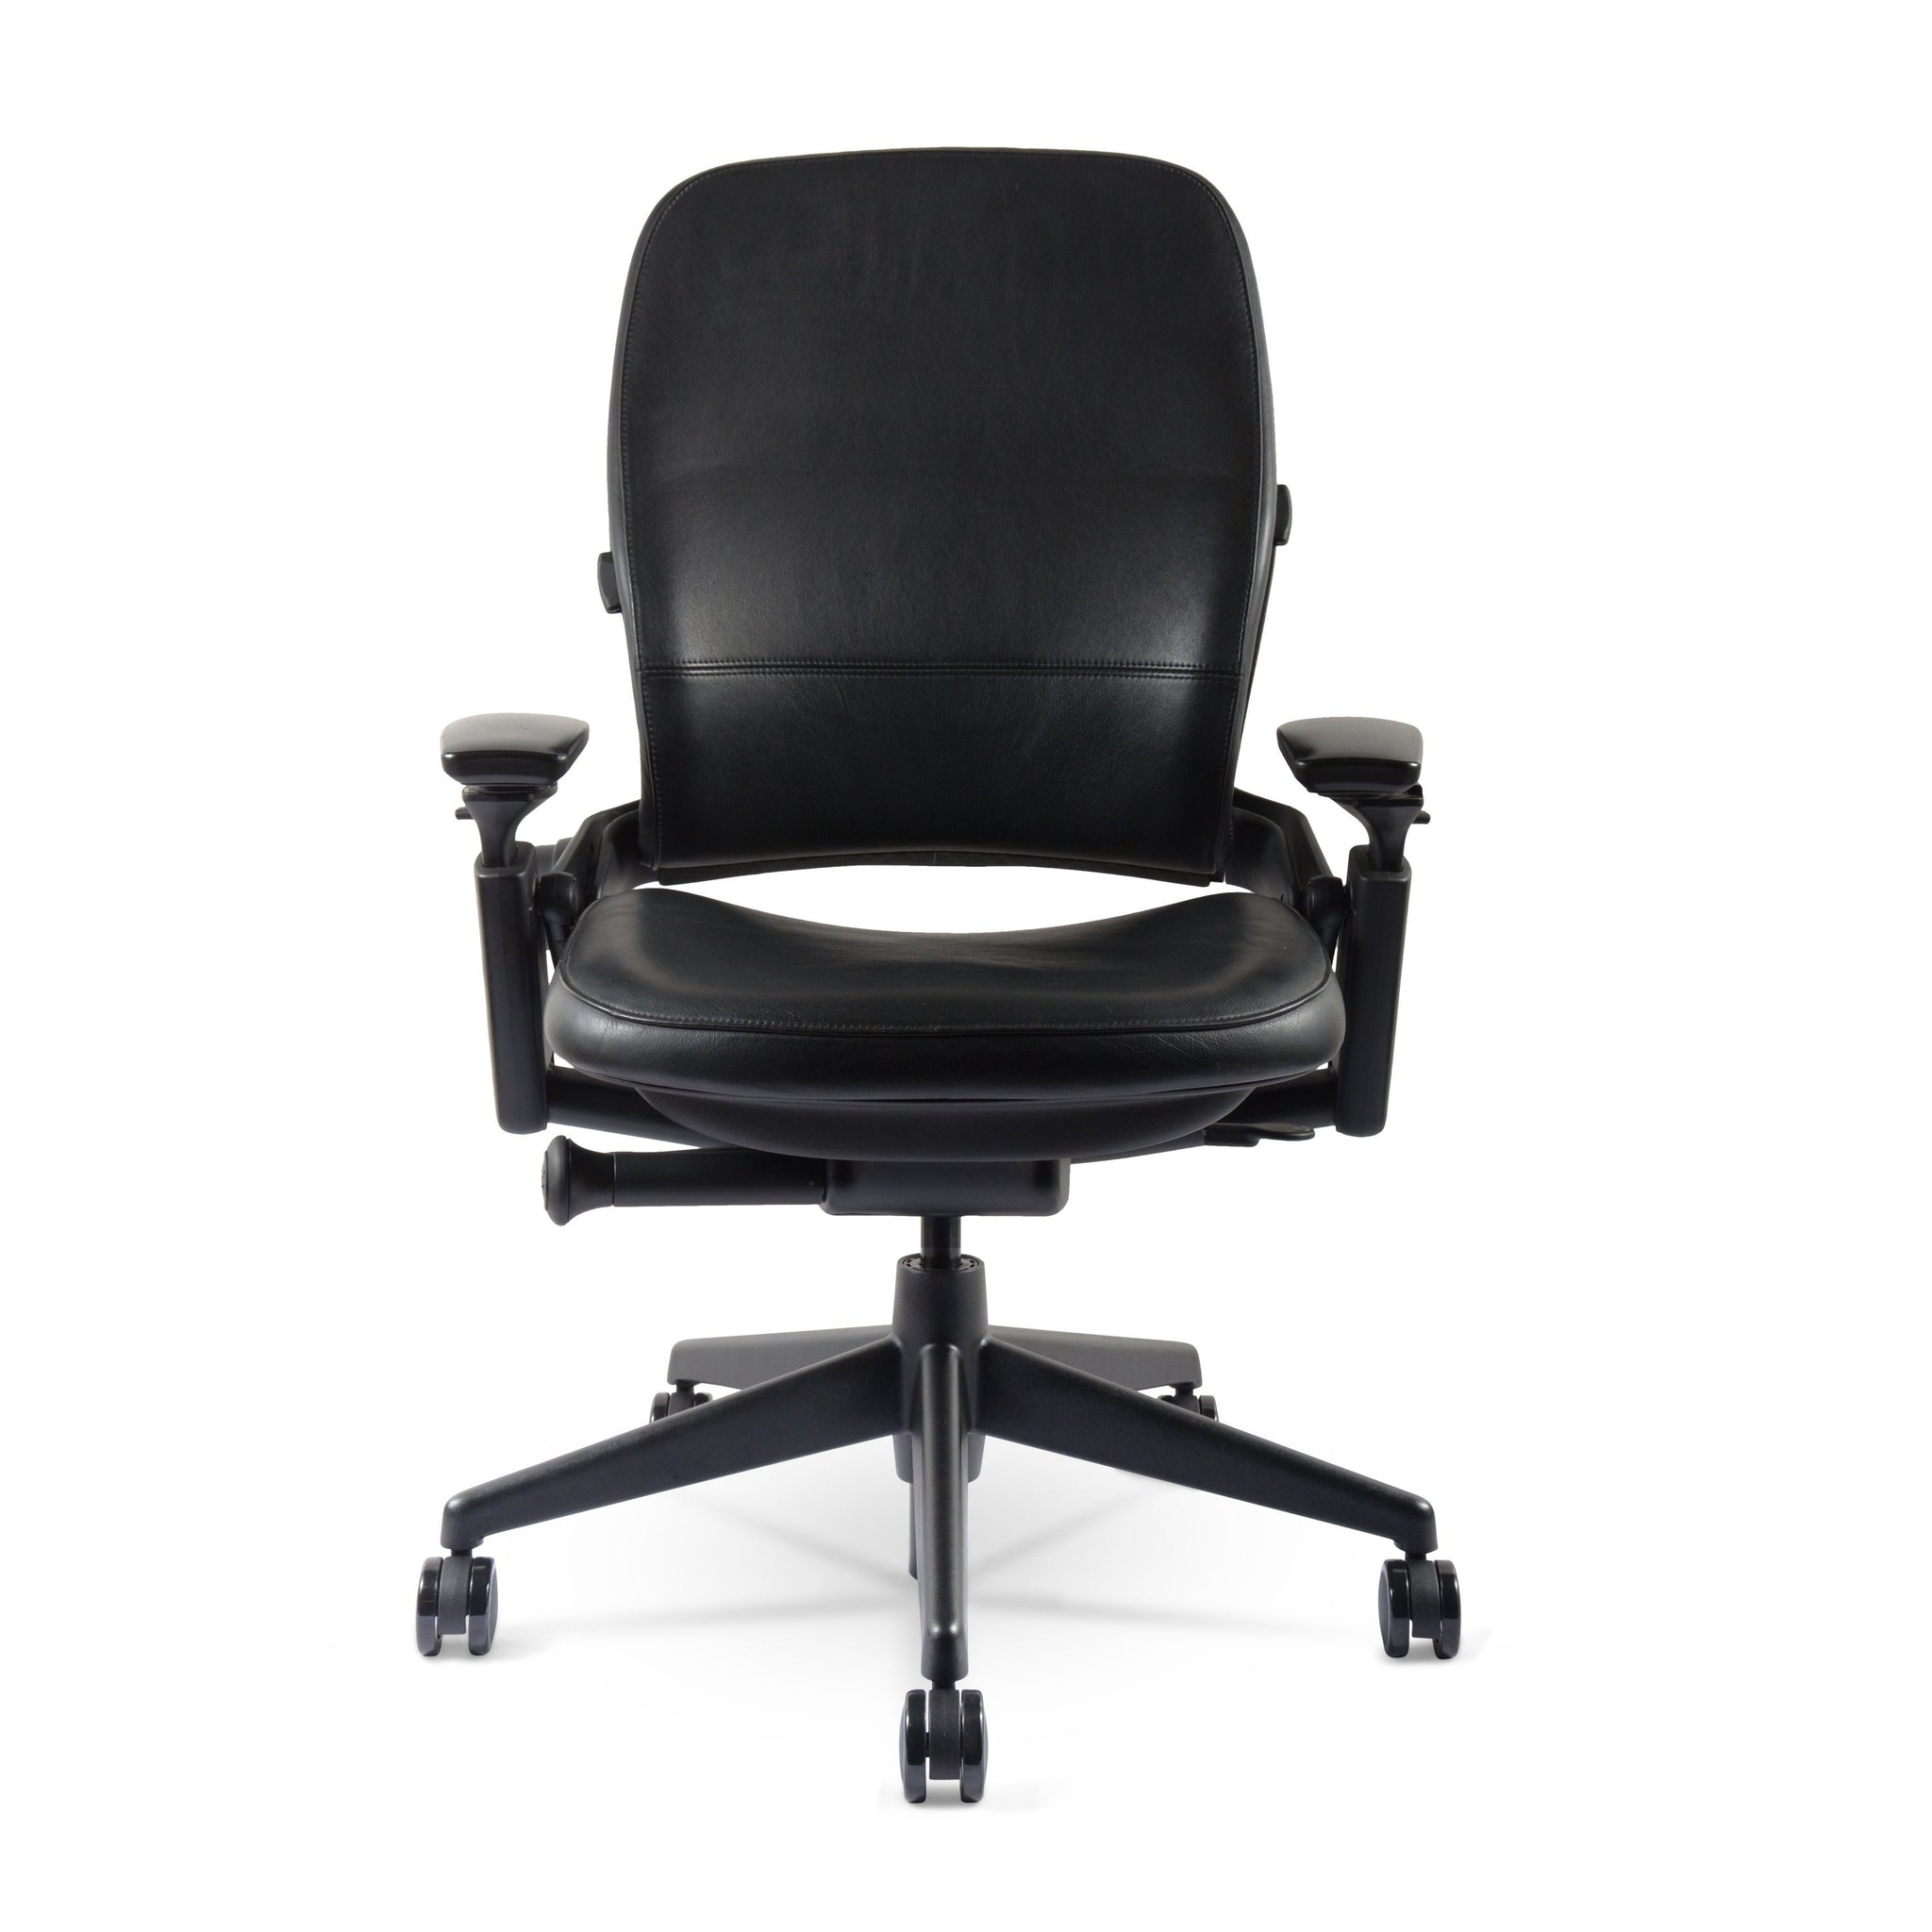 Steelcase Leap Chair V2 Renewed Black Leather Chairorama